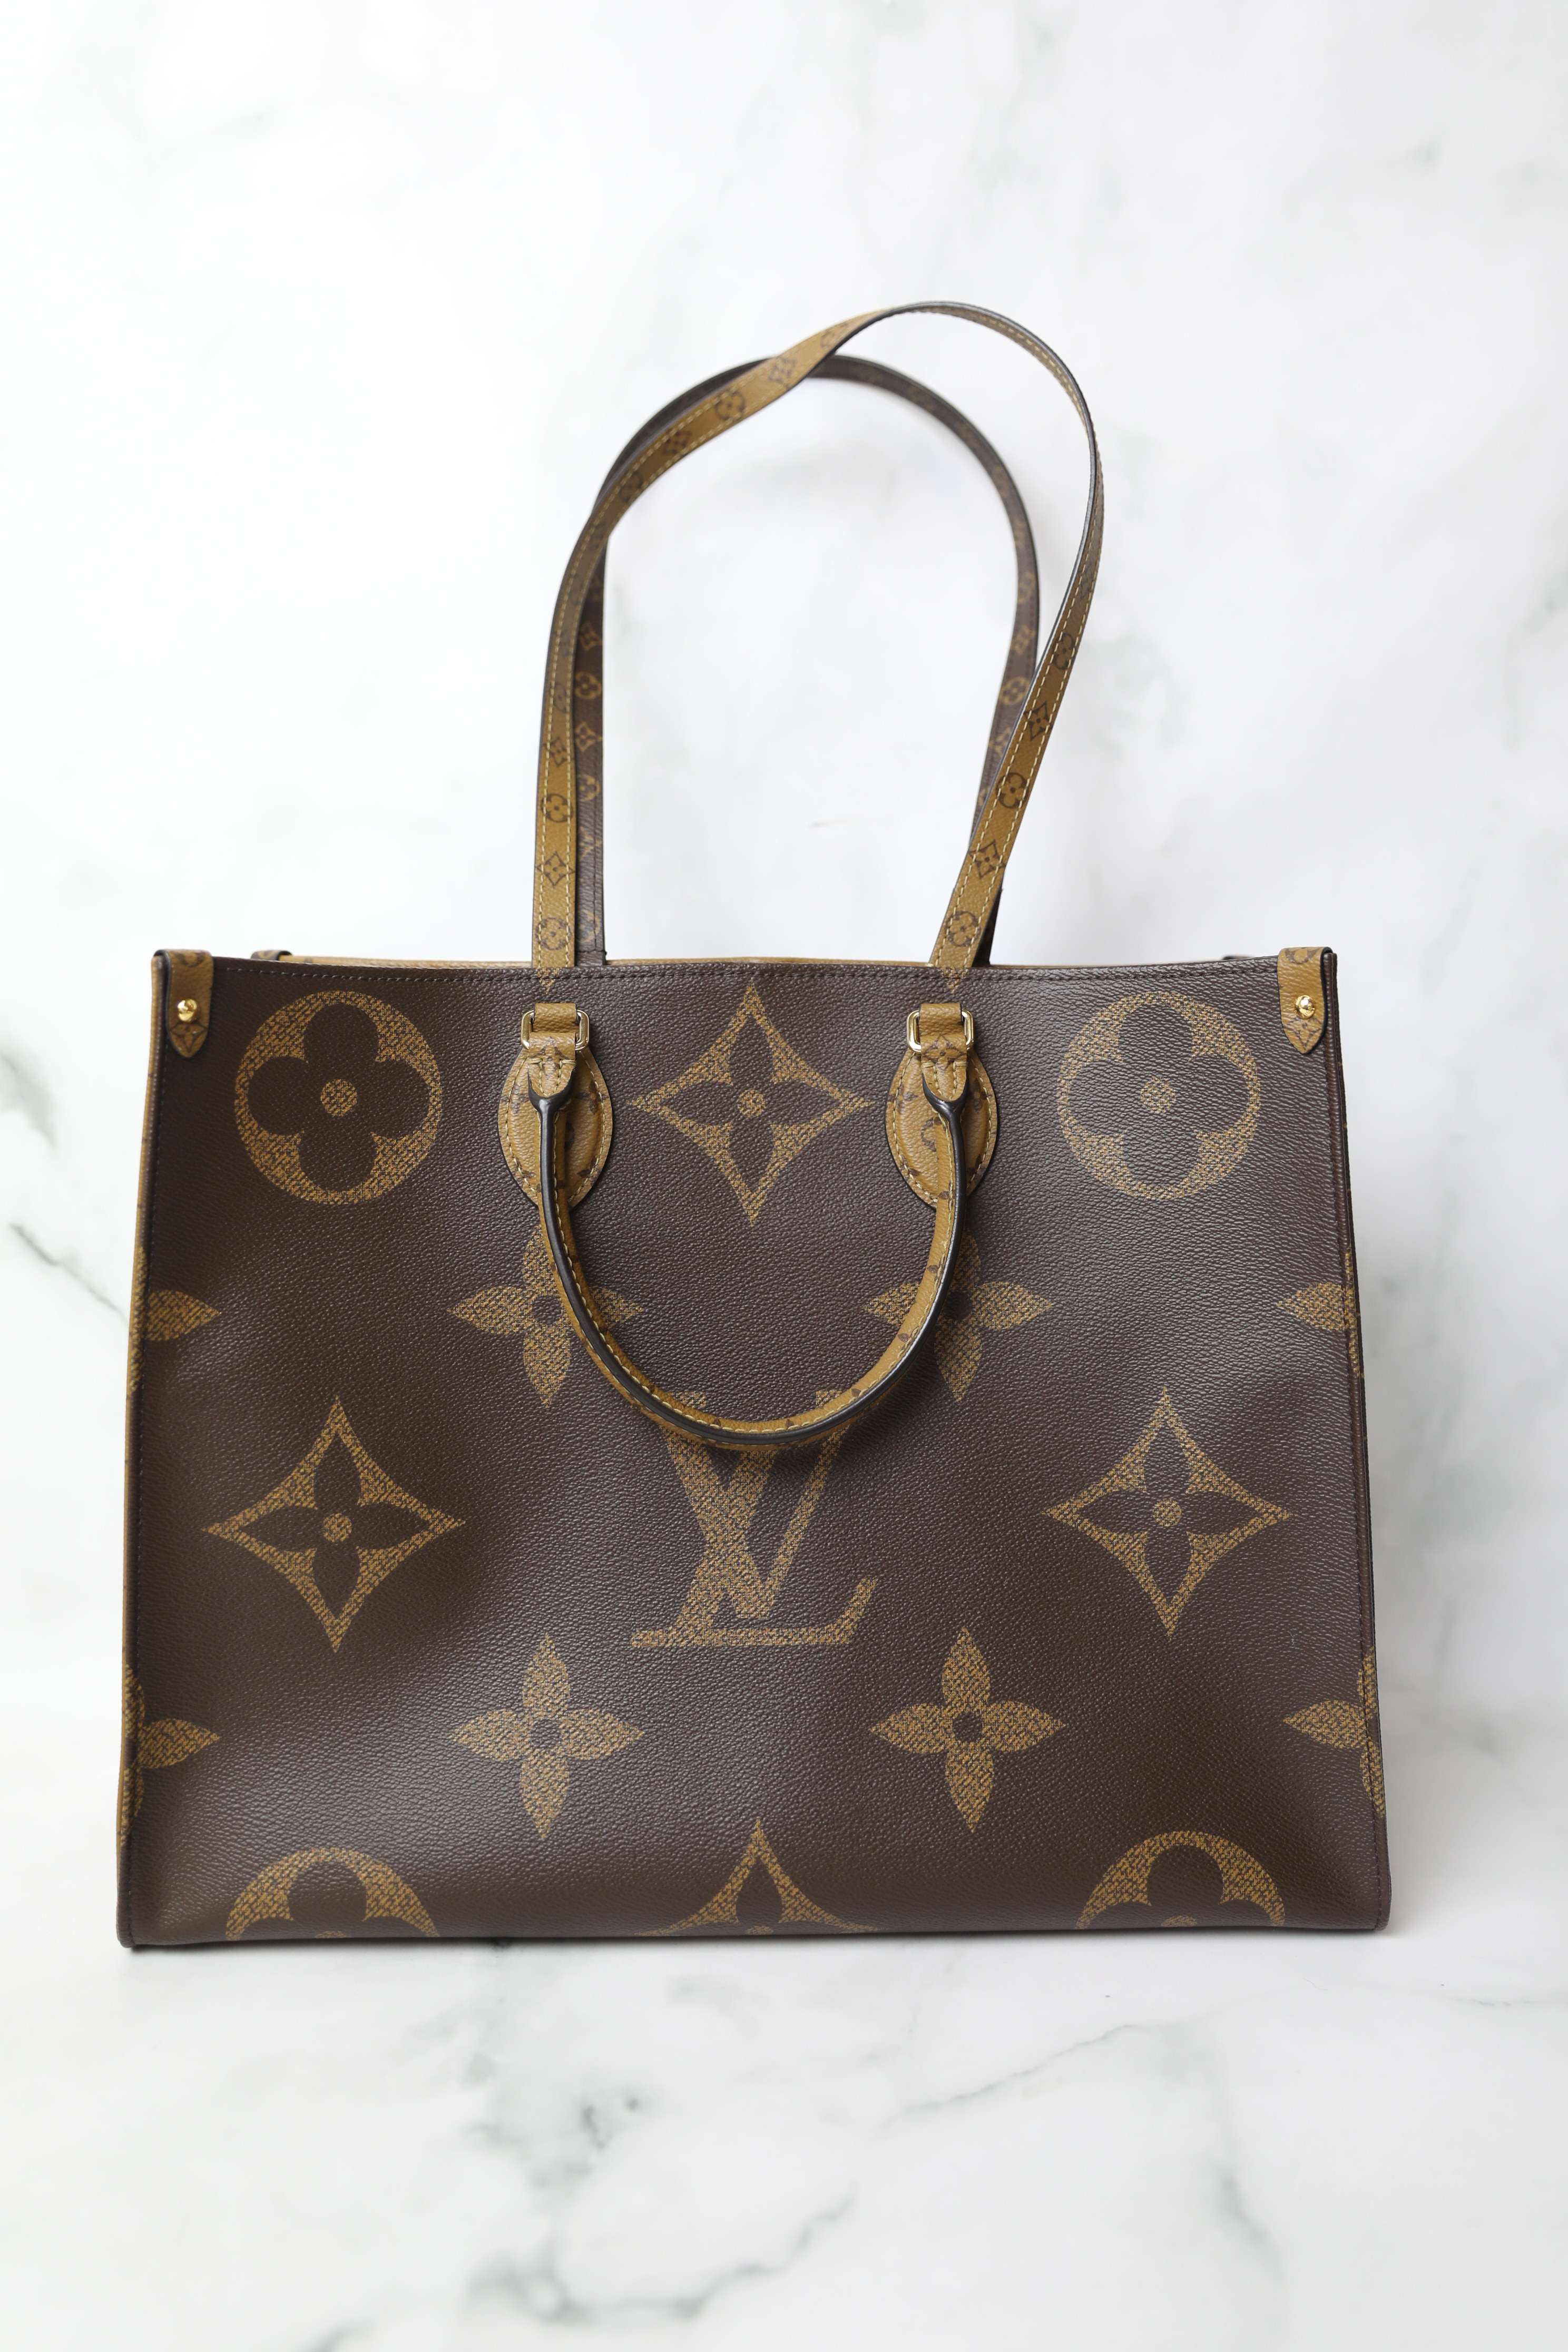 LOUIS VUITTON ON THE GO • Review (1st Impressions) 丨 Roma D.C. 